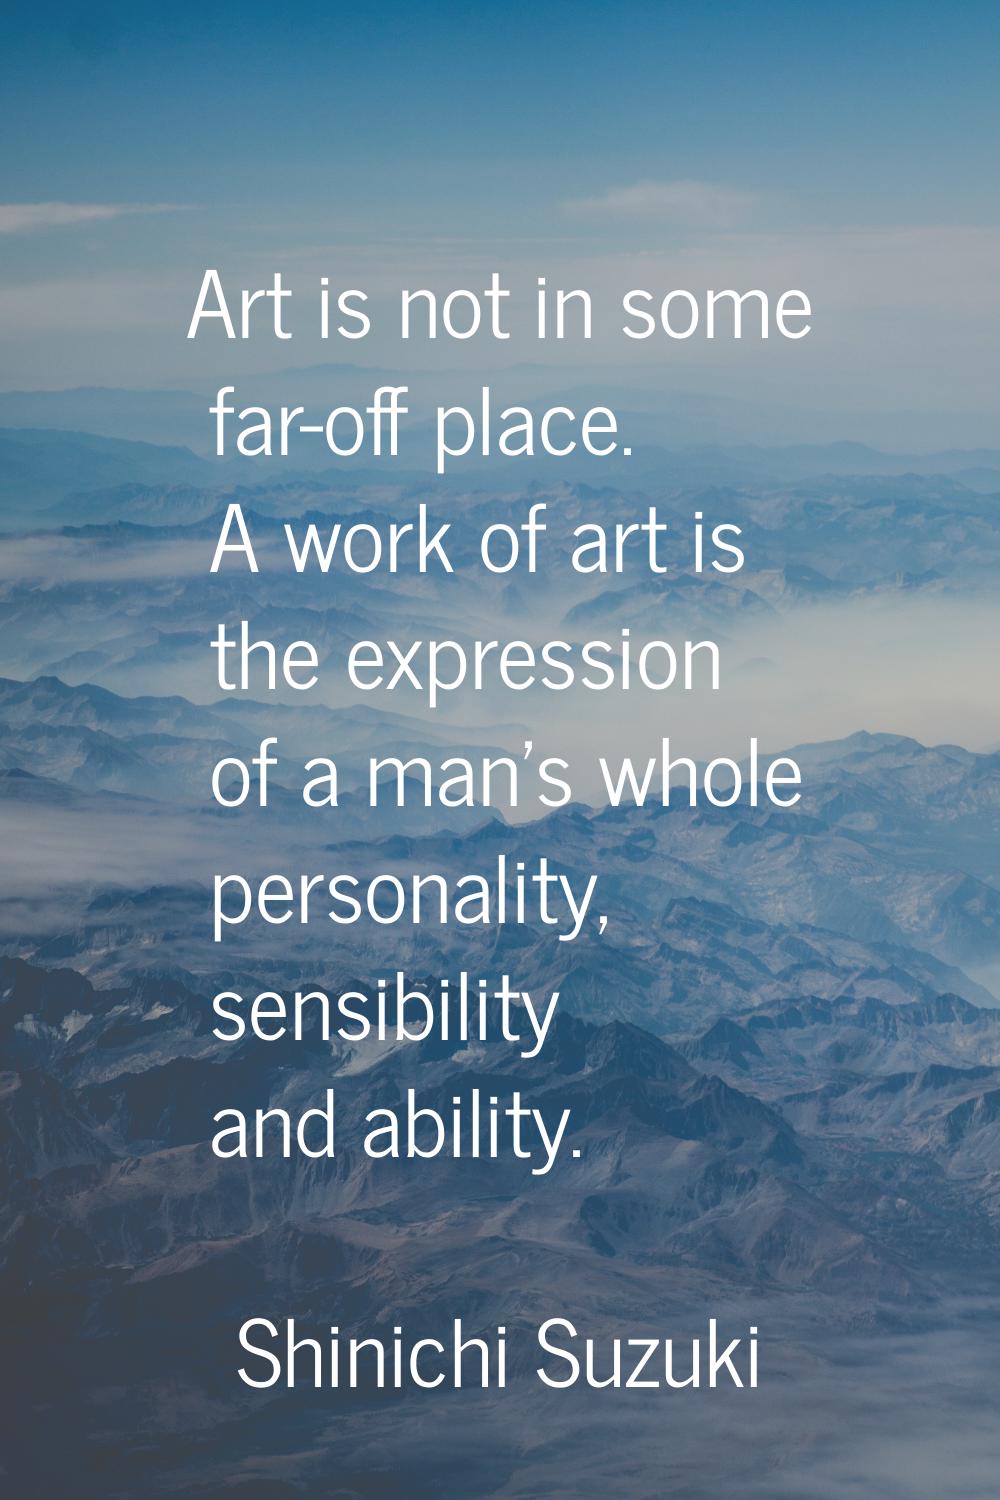 Art is not in some far-off place. A work of art is the expression of a man's whole personality, sen